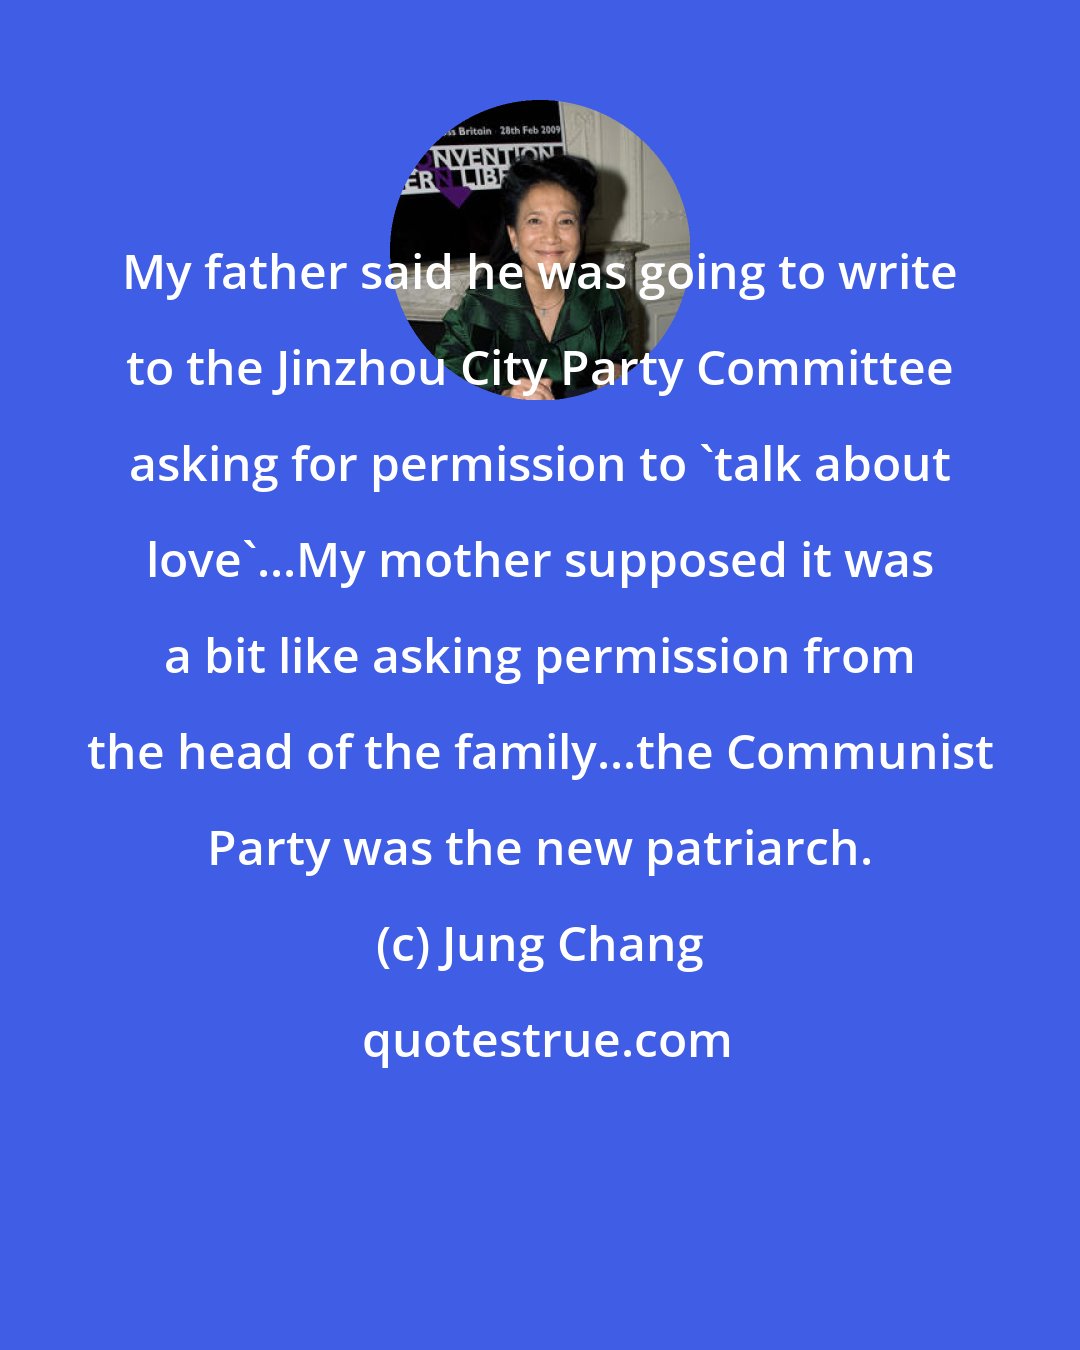 Jung Chang: My father said he was going to write to the Jinzhou City Party Committee asking for permission to 'talk about love'...My mother supposed it was a bit like asking permission from the head of the family...the Communist Party was the new patriarch.